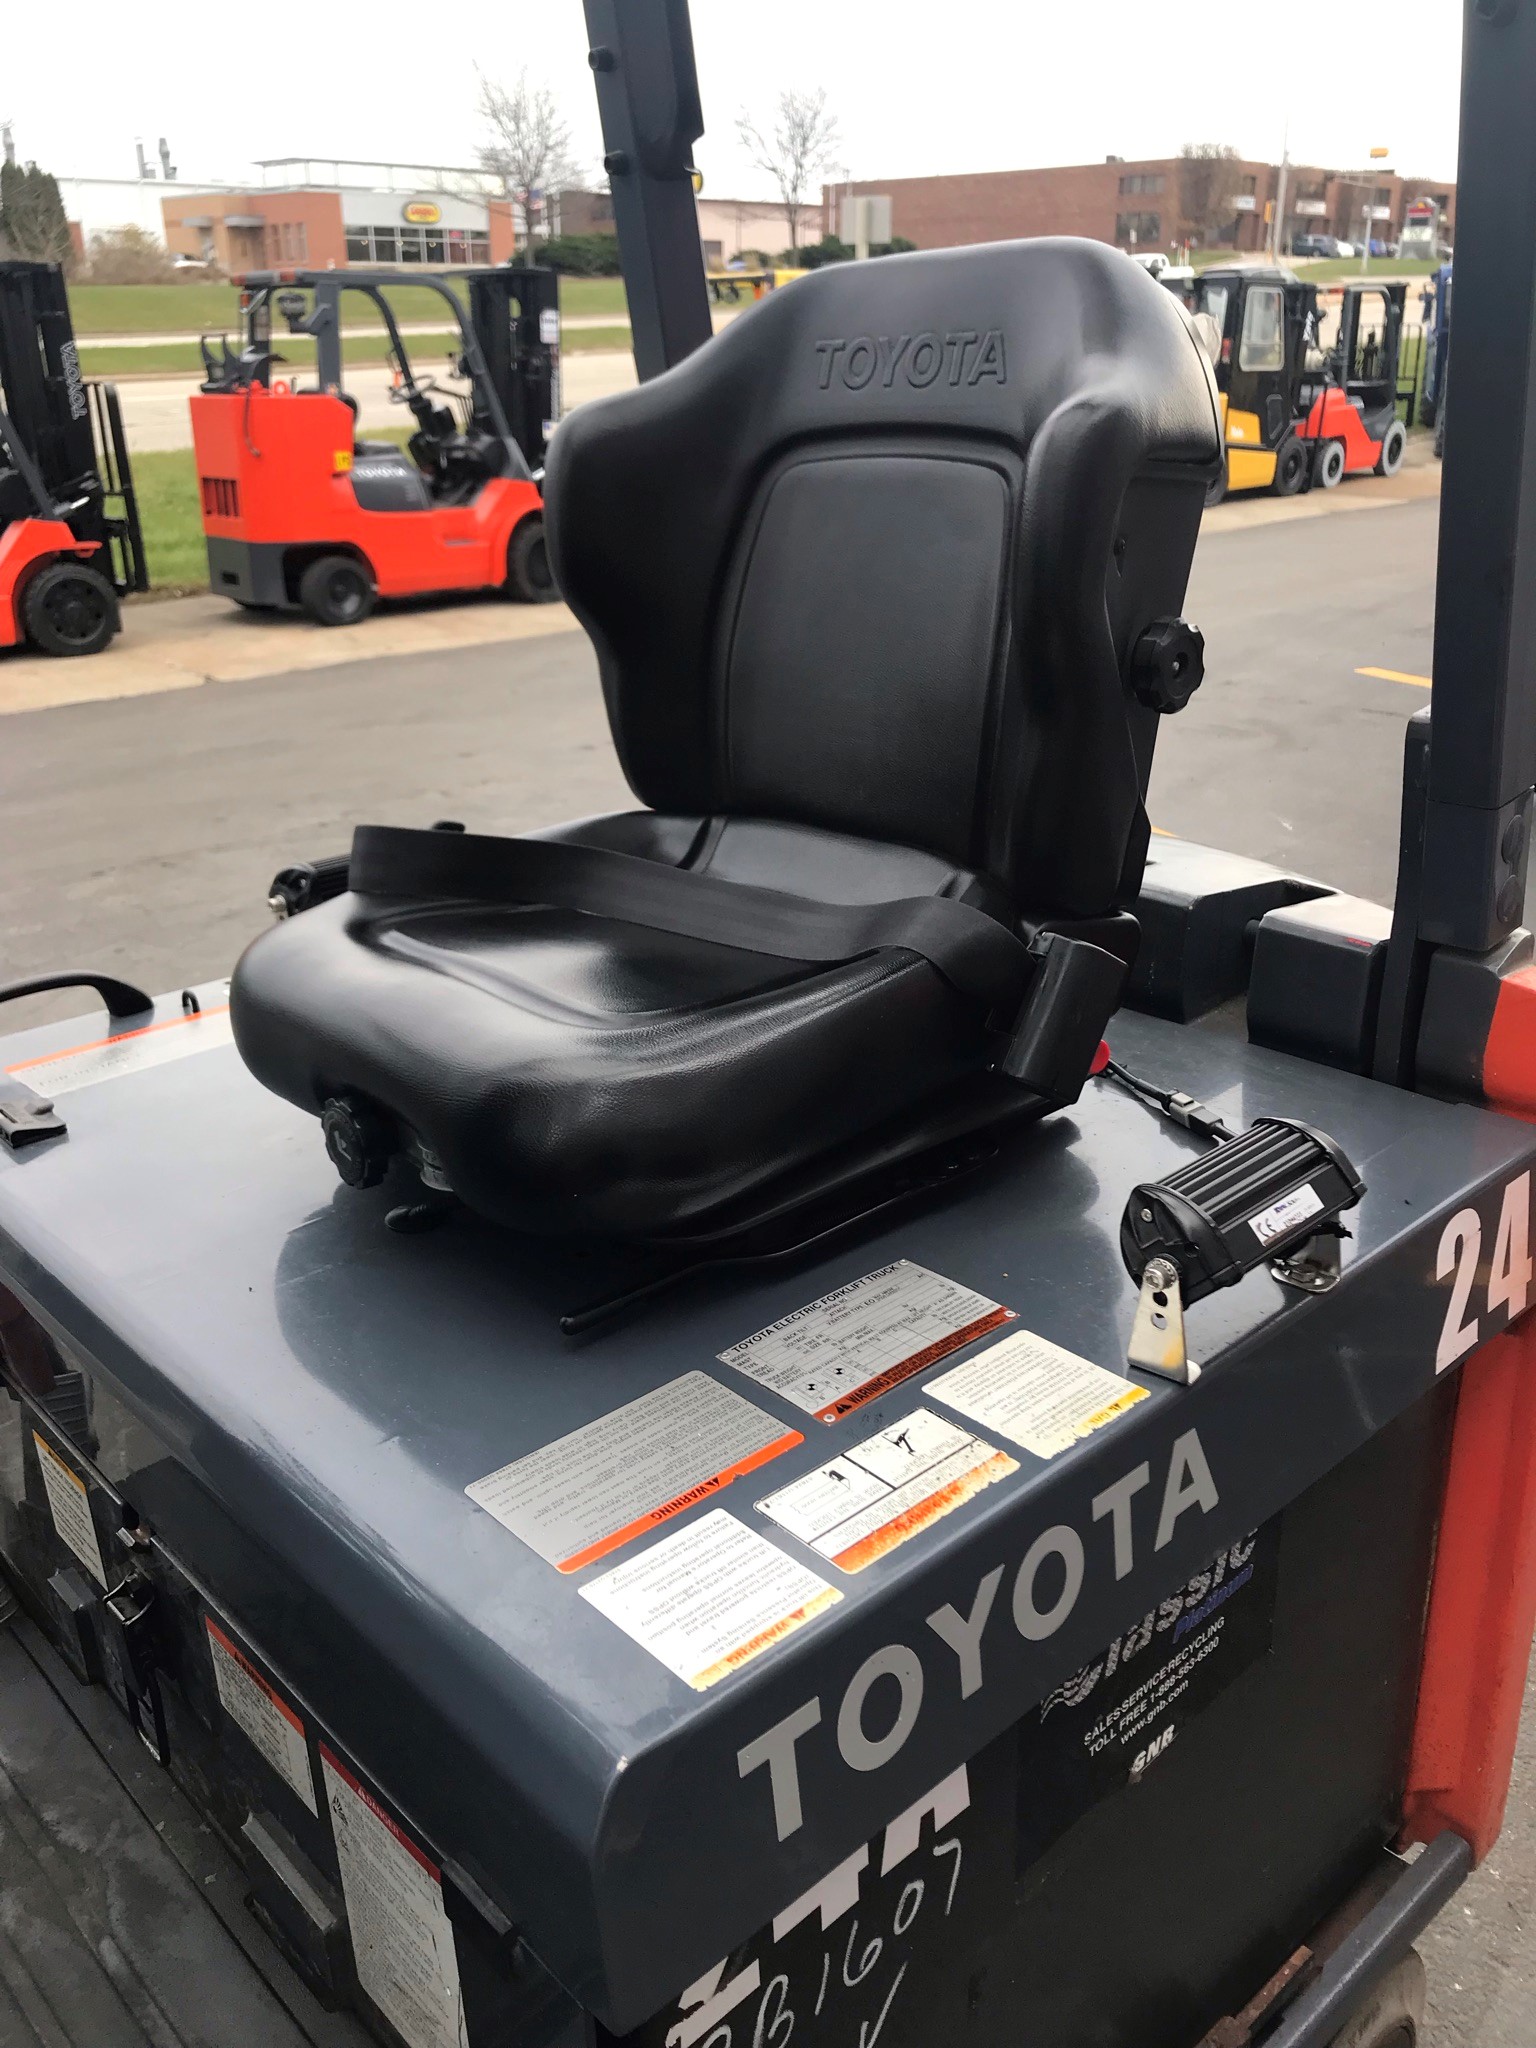 Orange 2015 toyota forklift with 5,000lb capacity for sale